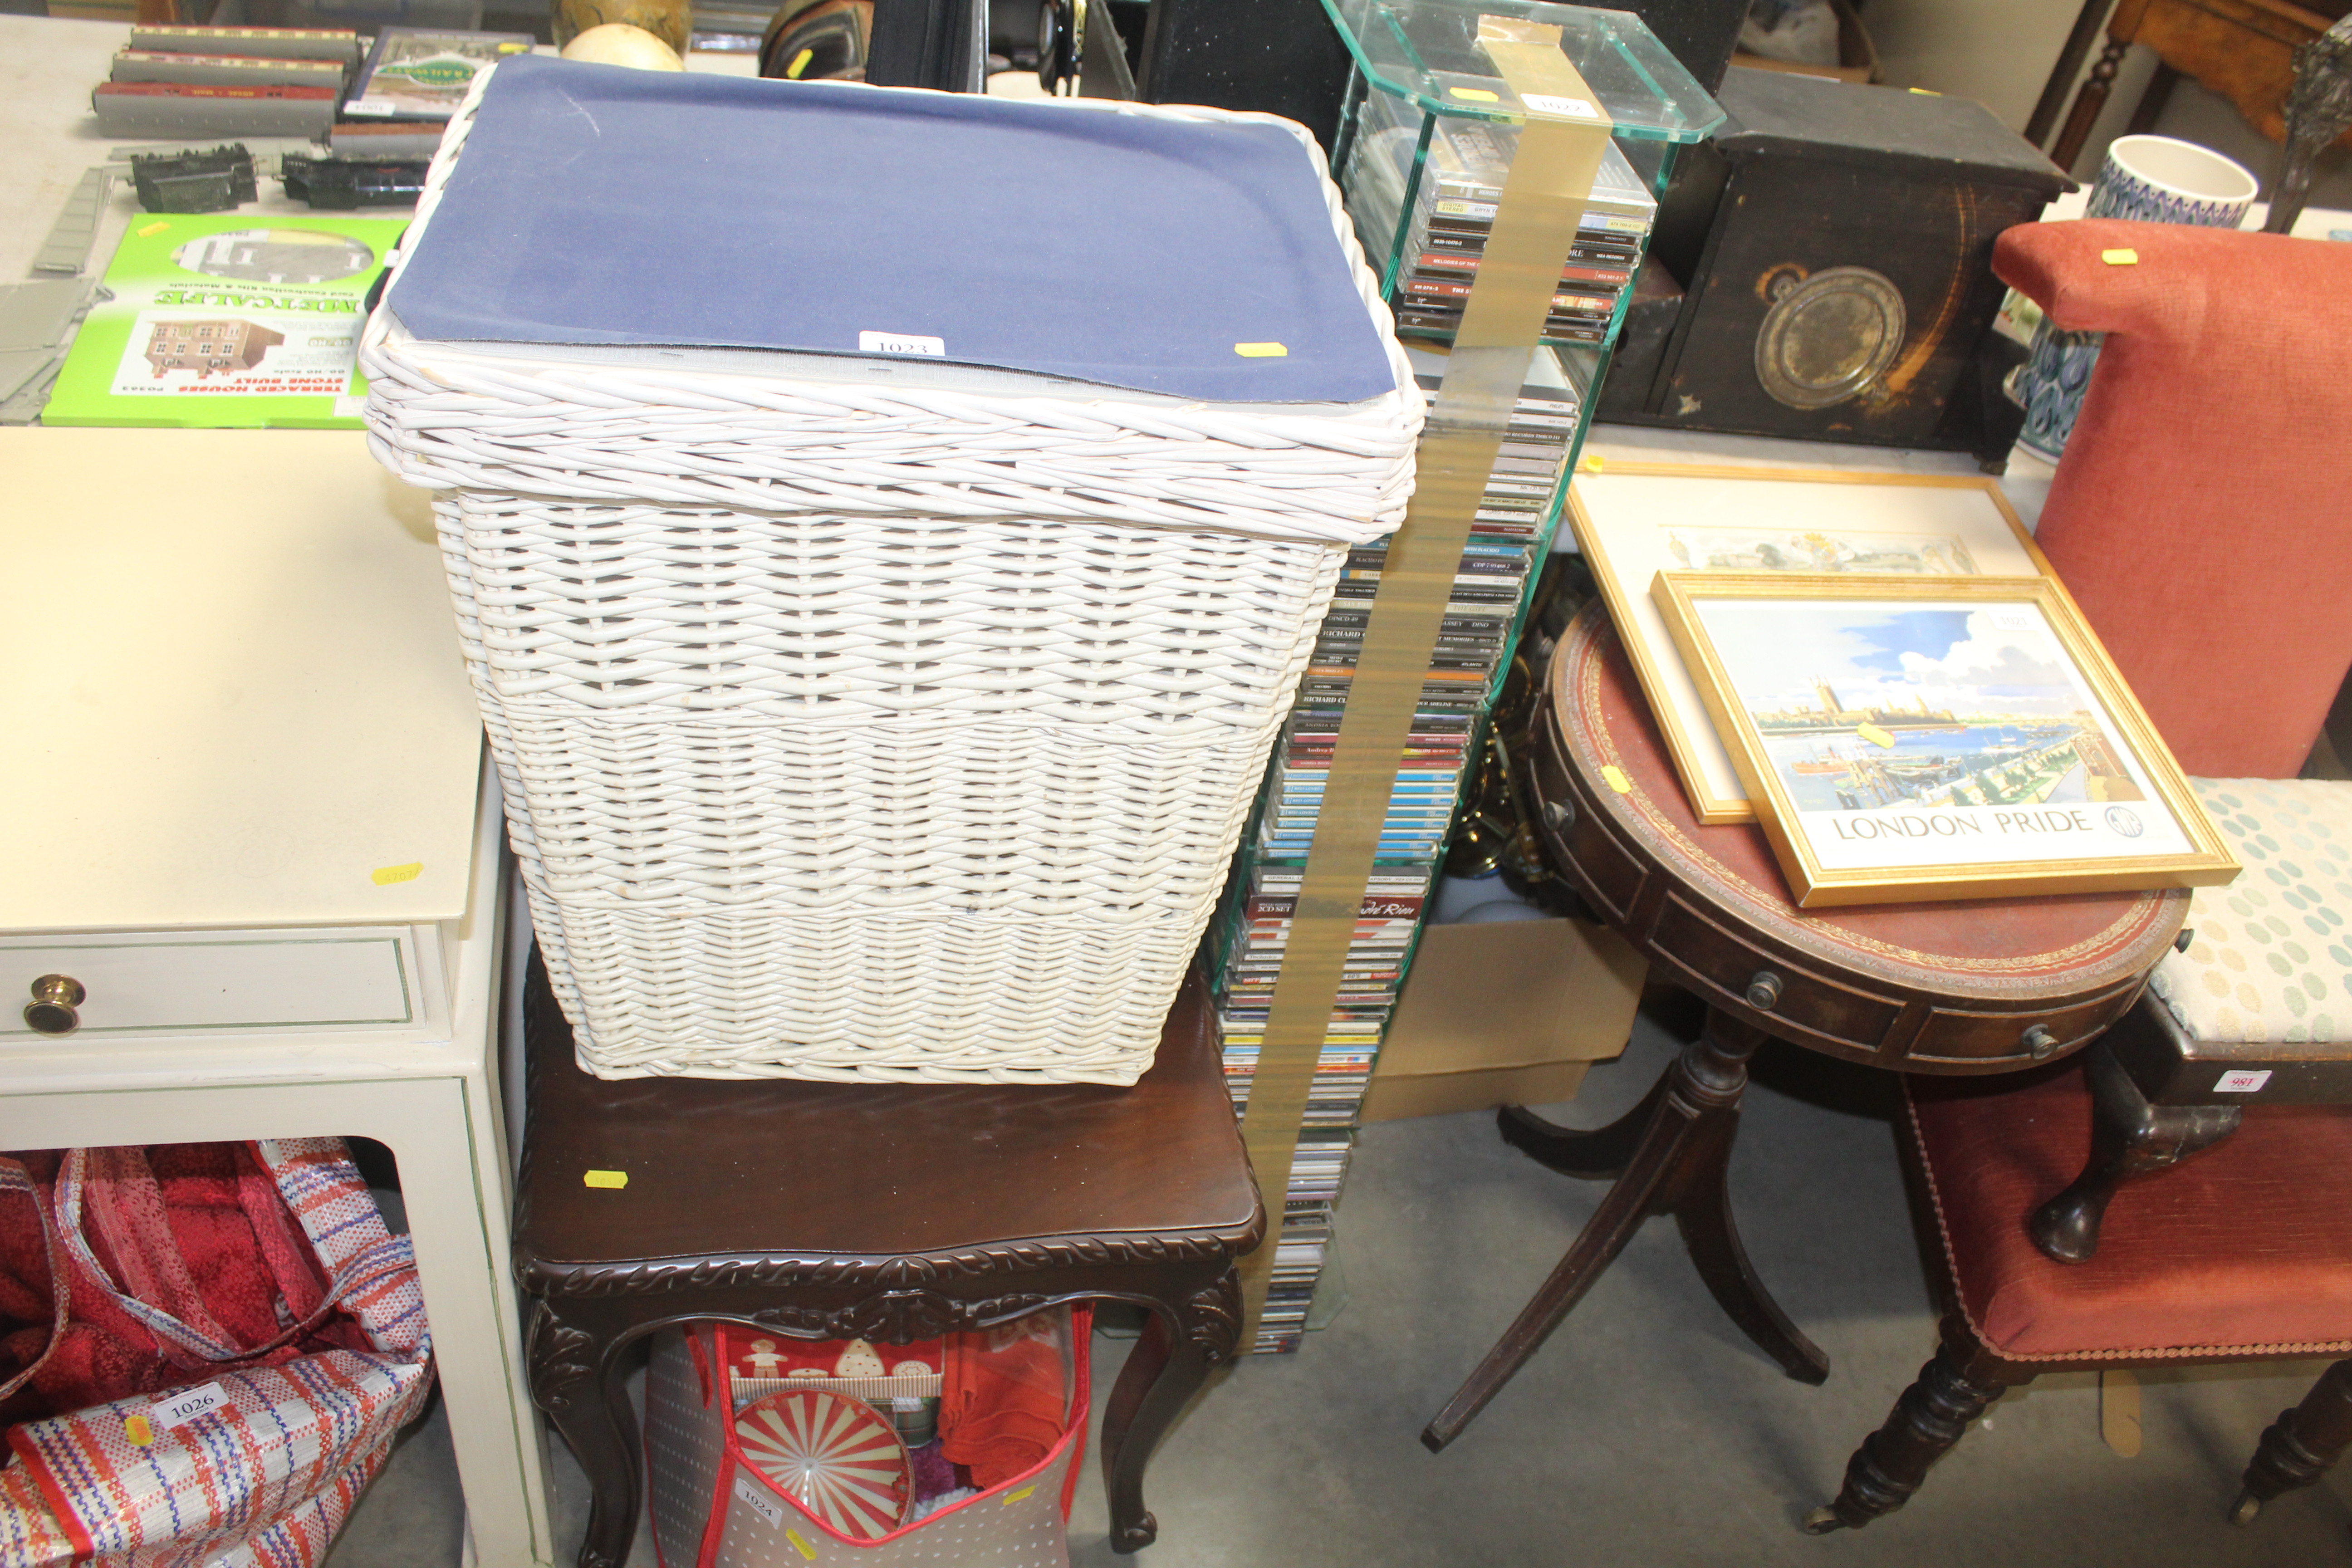 A wicker laundry basket and contents together with